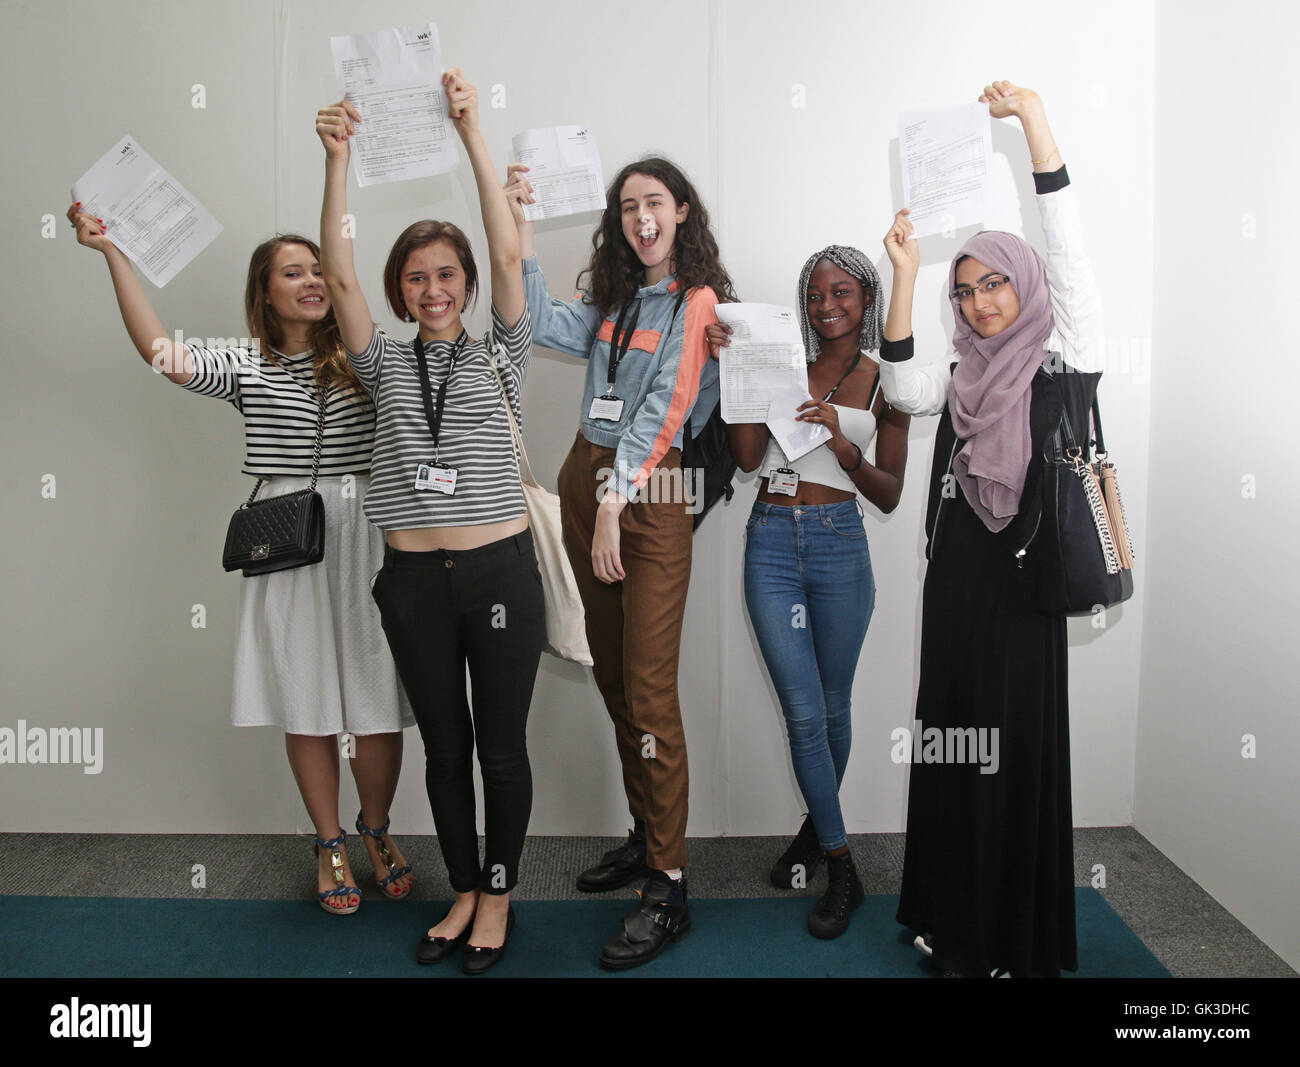 Students (left to right) Ana Cazacu (A,A,B), Lara Parizotto (3 A*'s), Nicoleta Andronic (A,A,A), Laima Barros (B,B,C) and Aysha Begum (A,B,B) celebrate after receiving their A-Level results at Westminster Kingsway College's King's Cross Centre, London. Stock Photo